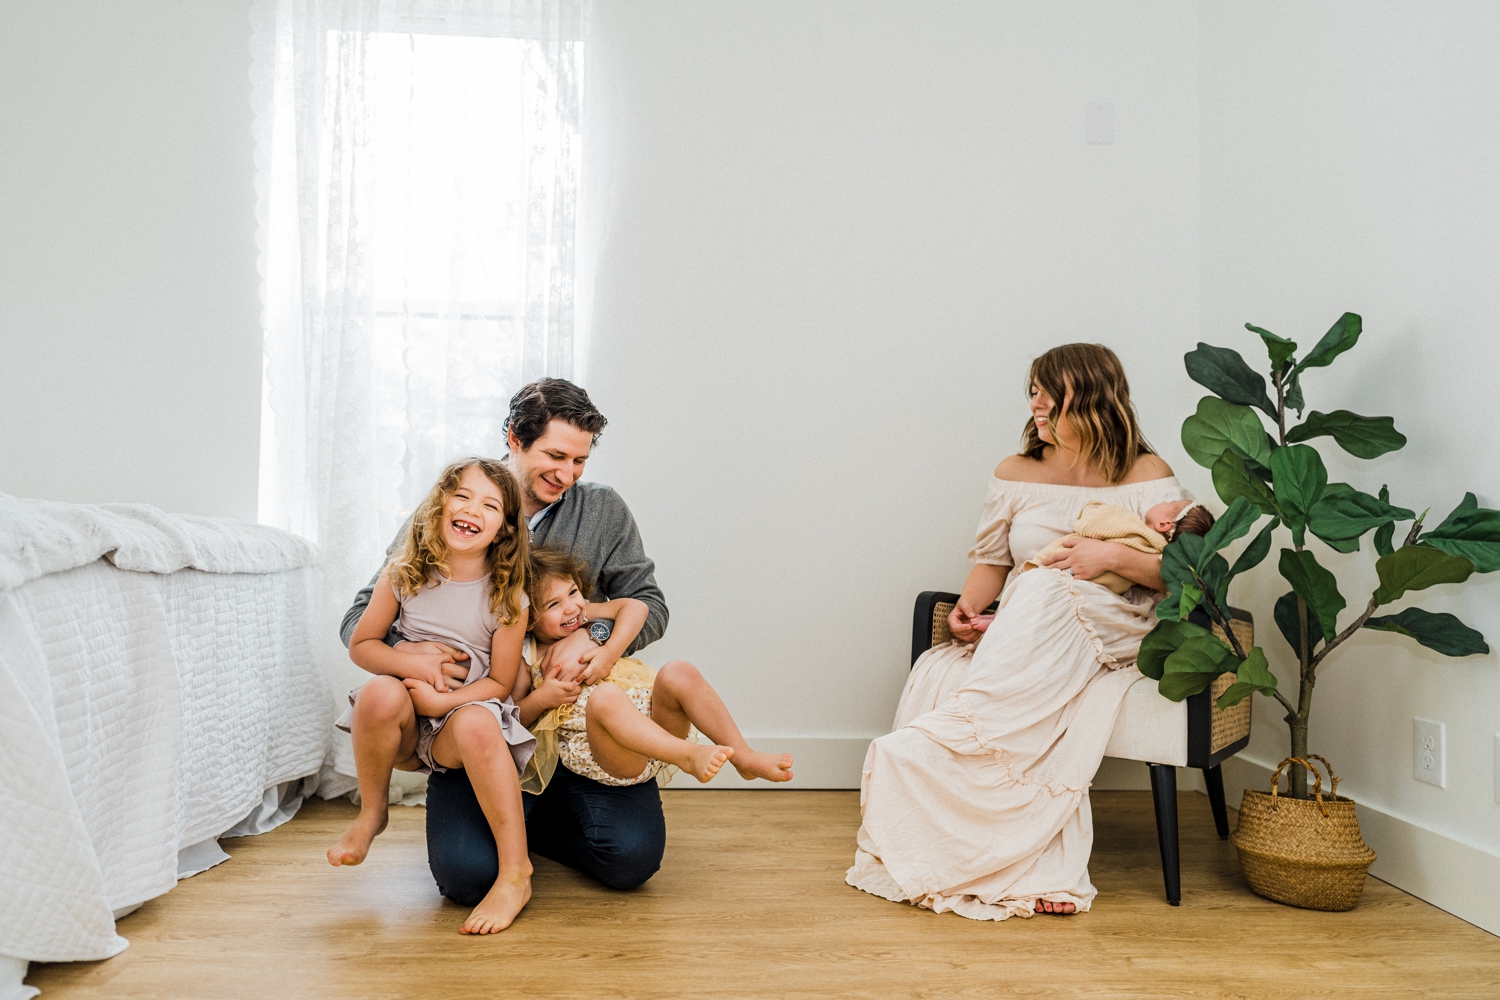 A candid family newborn session in a Dallas studio was so fun for this family of 5! They just added their last baby girl to the family and knew they wanted to commemorate this with a newborn session. | Dallas Family Photographer | Brittnie Renee Photo